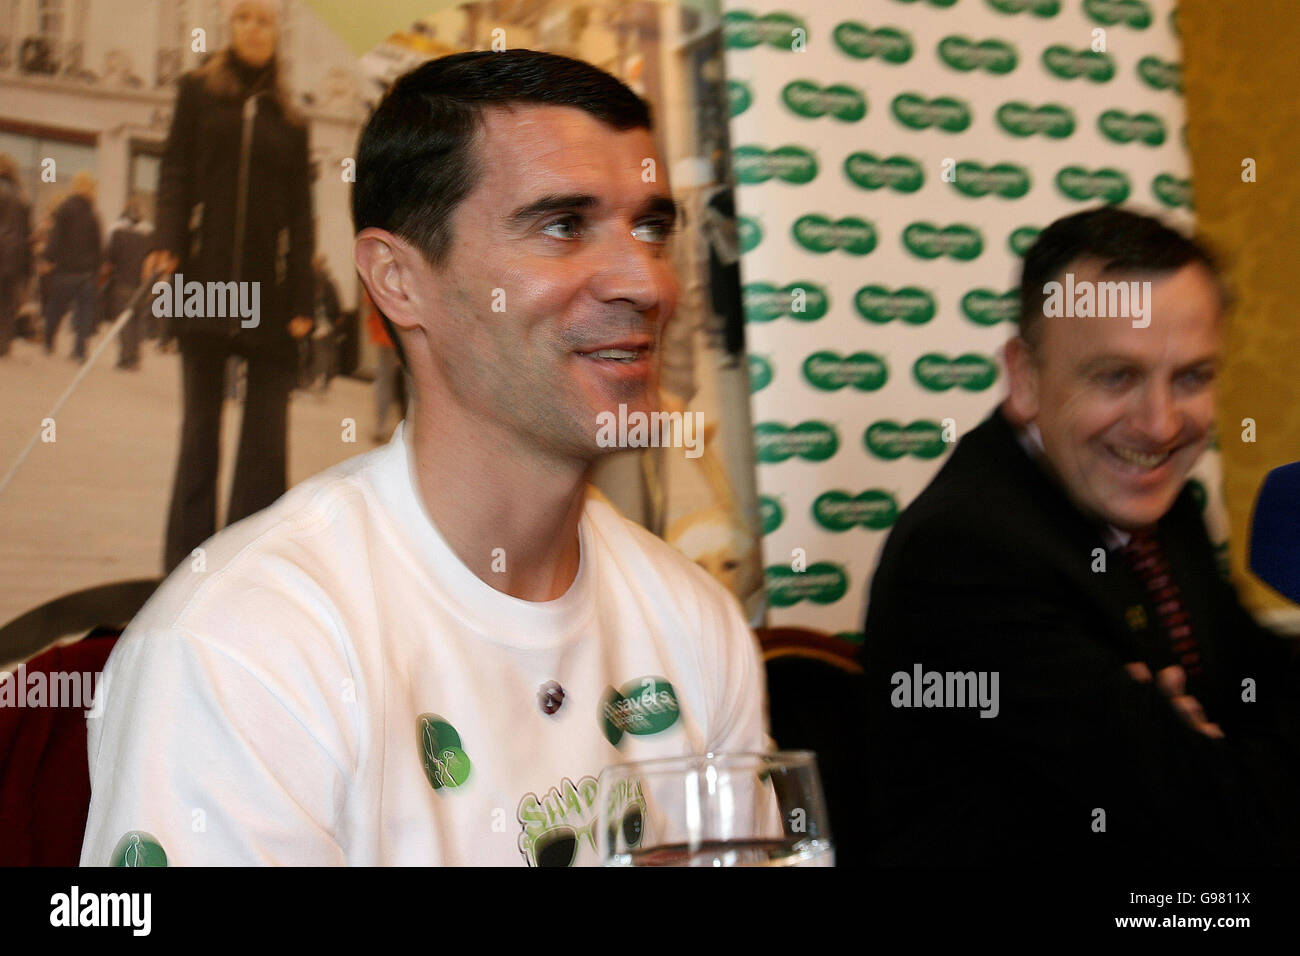 Glasgow Celtic Soccer Star Roy Keane (left) and Padraig Mallon chief executive of Irish Guide Dogs for the Blind at a press conference in Dublin, Tuesday March 14 2006, where they launched the 'Shades 2006' campaign'. Roy Keane invited schools, businesses and organisations to register now for 'shades week' which starts on May 1. PRESS ASSOCIATION Photo. Photo credit should read: Julien Behal/PA Stock Photo